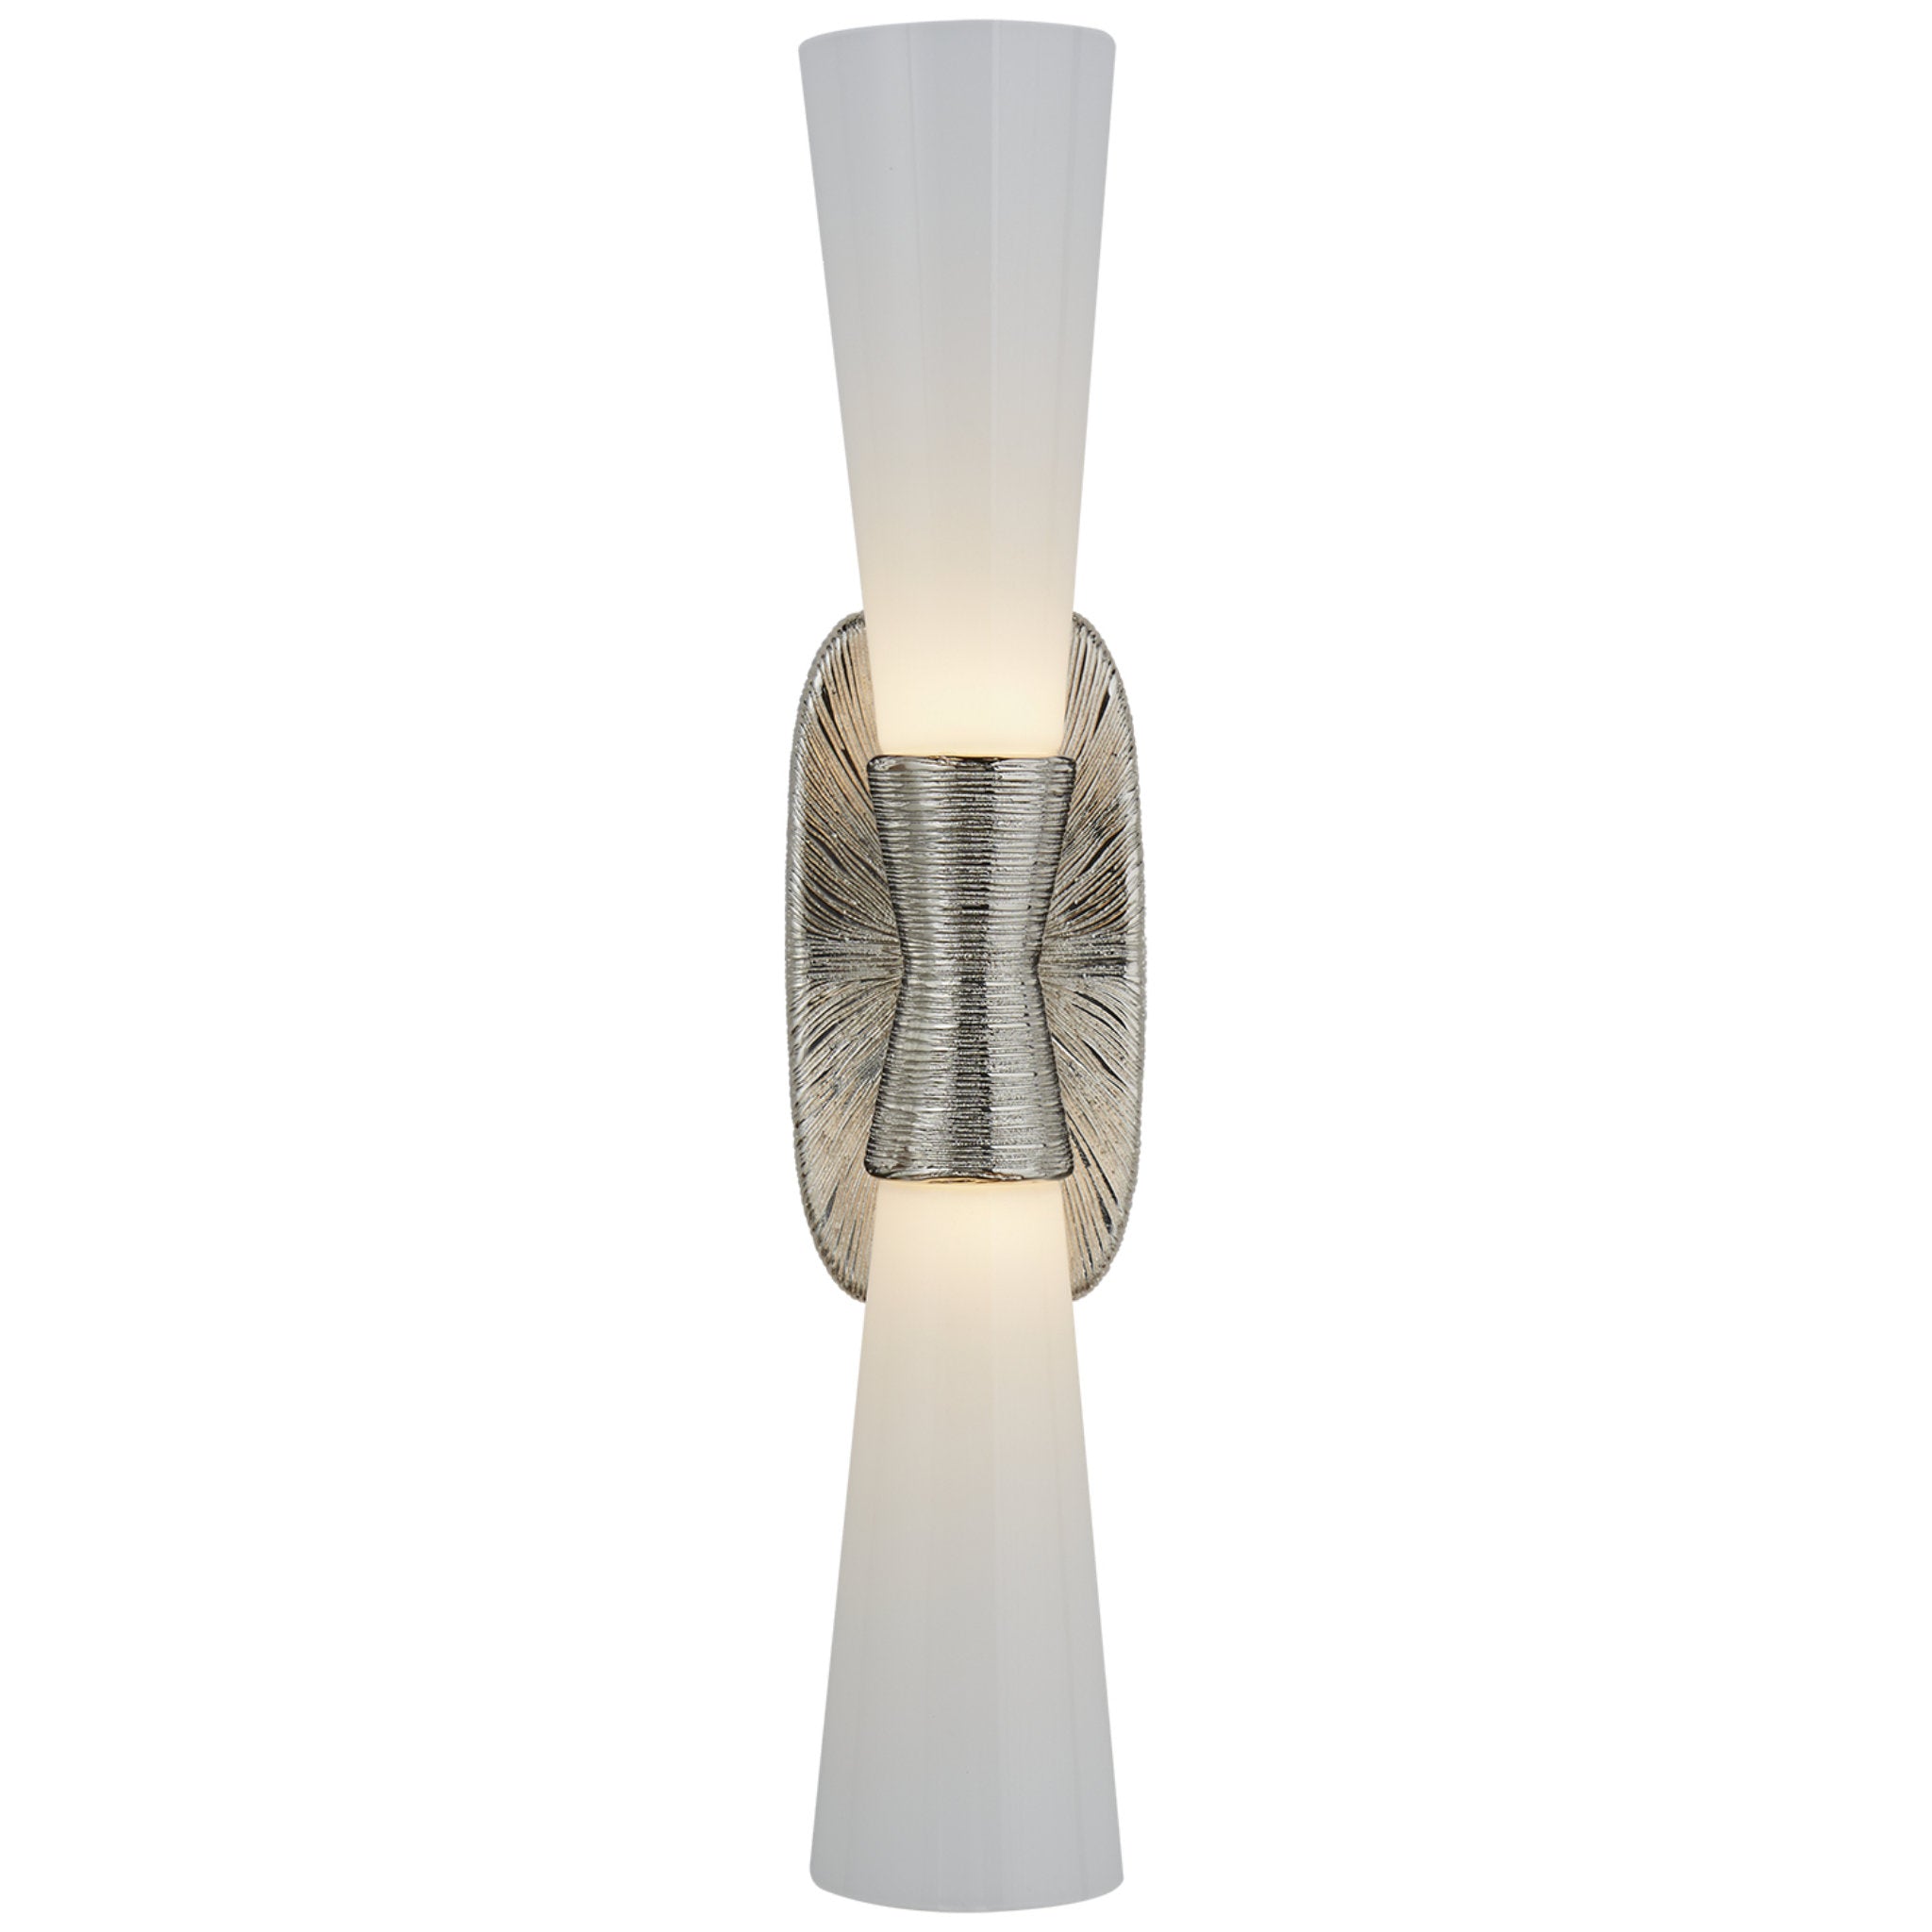 Kelly Wearstler Utopia Large Double Bath Sconce in Polished Nickel with White Glass